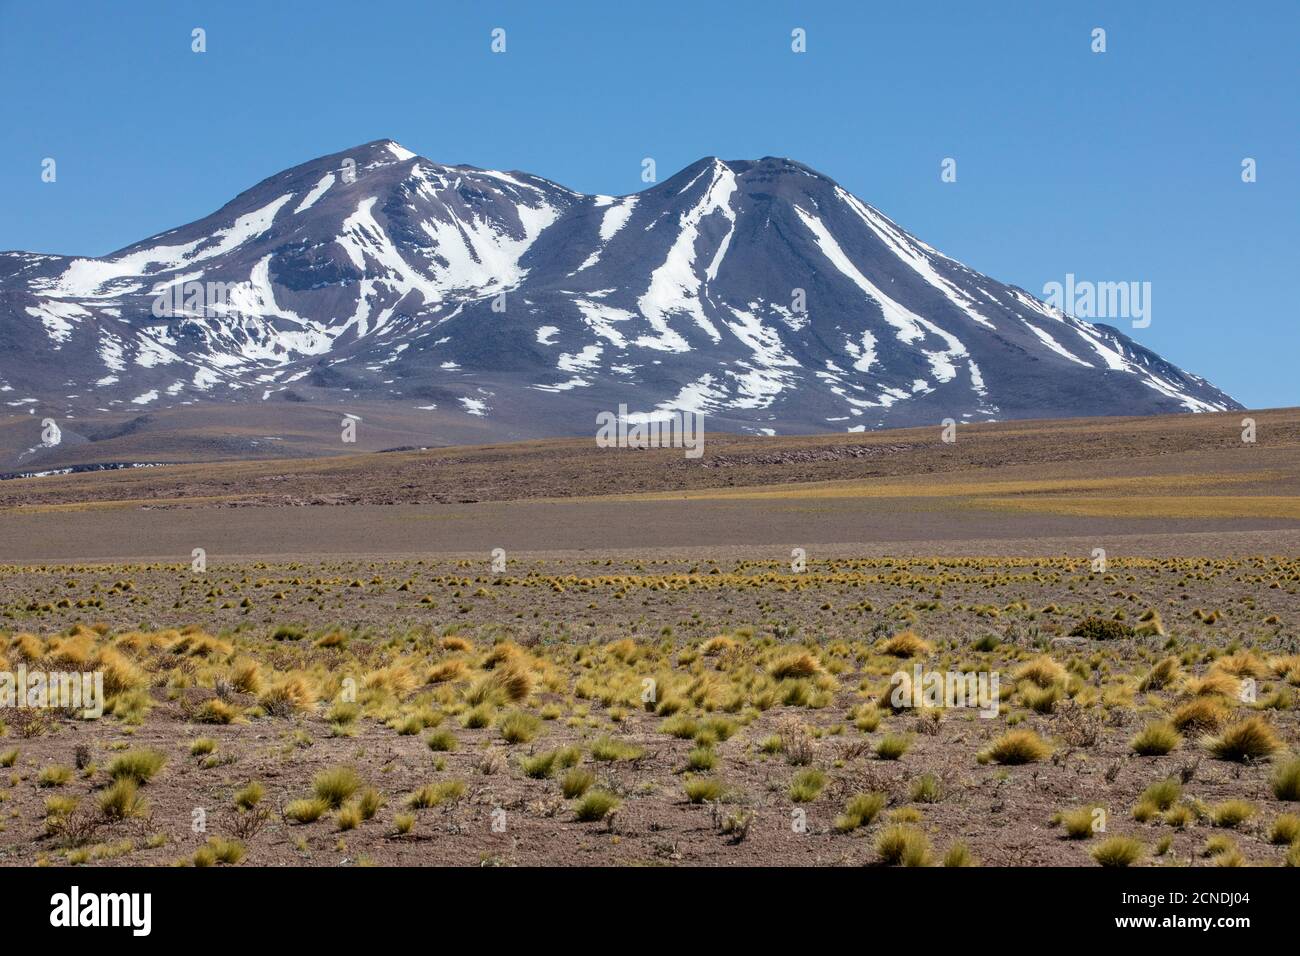 Stratovolcanoes in the Andean Central Volcanic Zone, Antofagasta Region, Chile Stock Photo